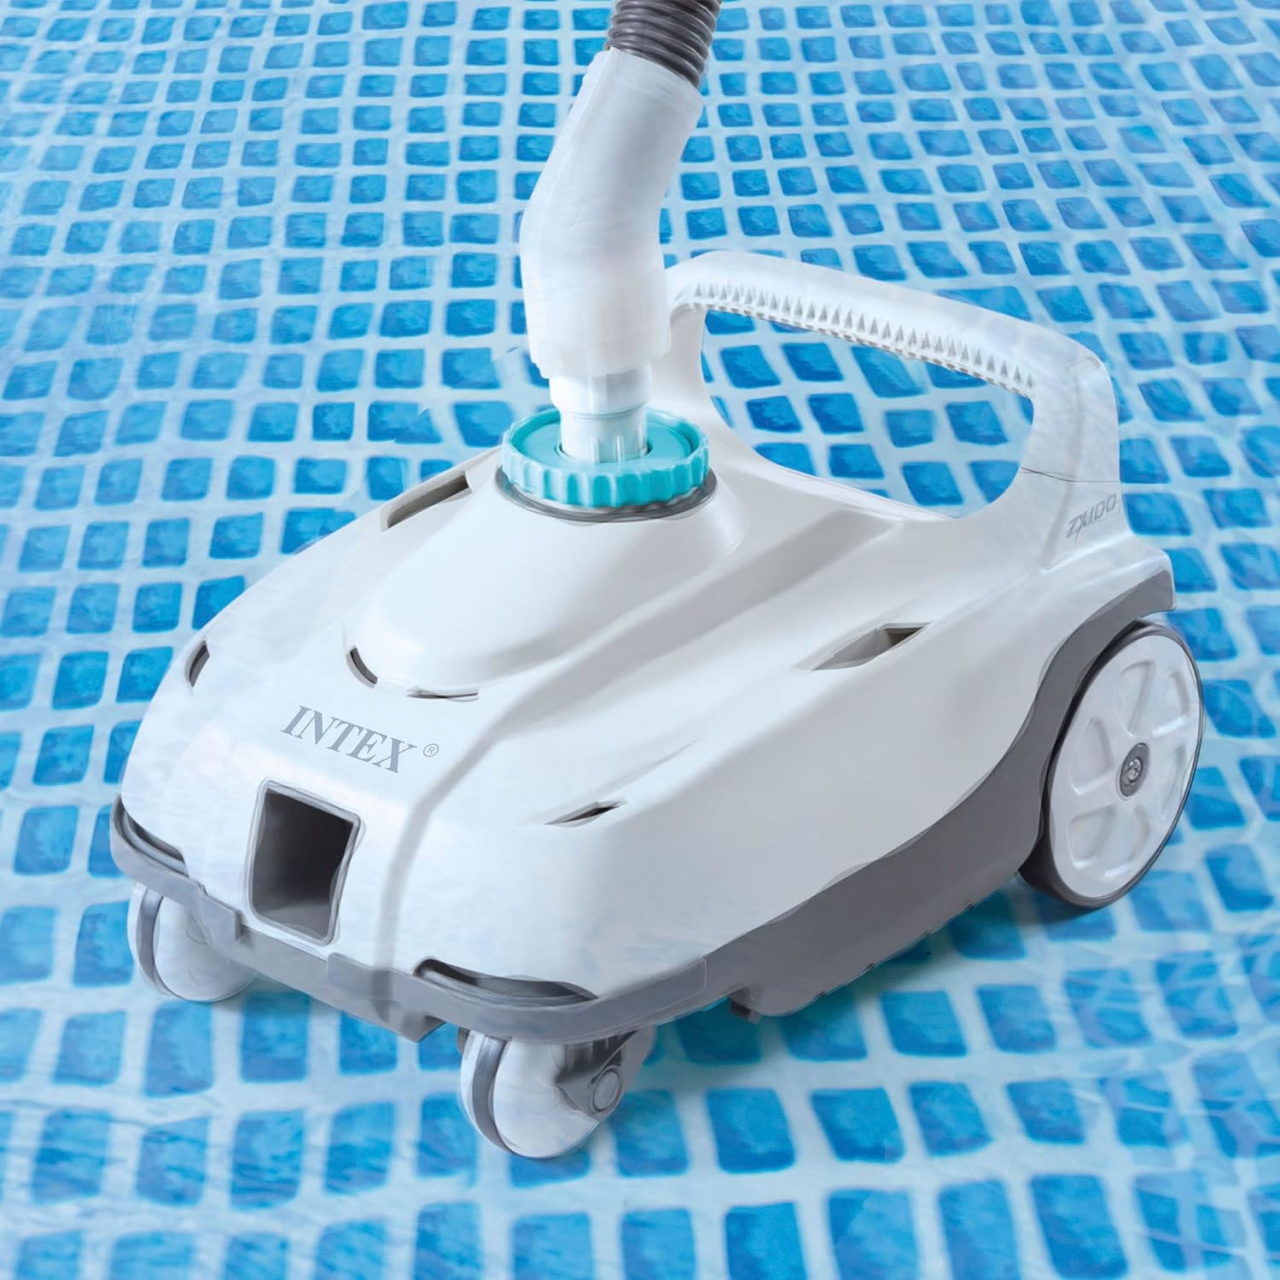 Intex 28006 Poolroboter Auto Pool Cleaner ZX100 Bodensauger Poolreiniger